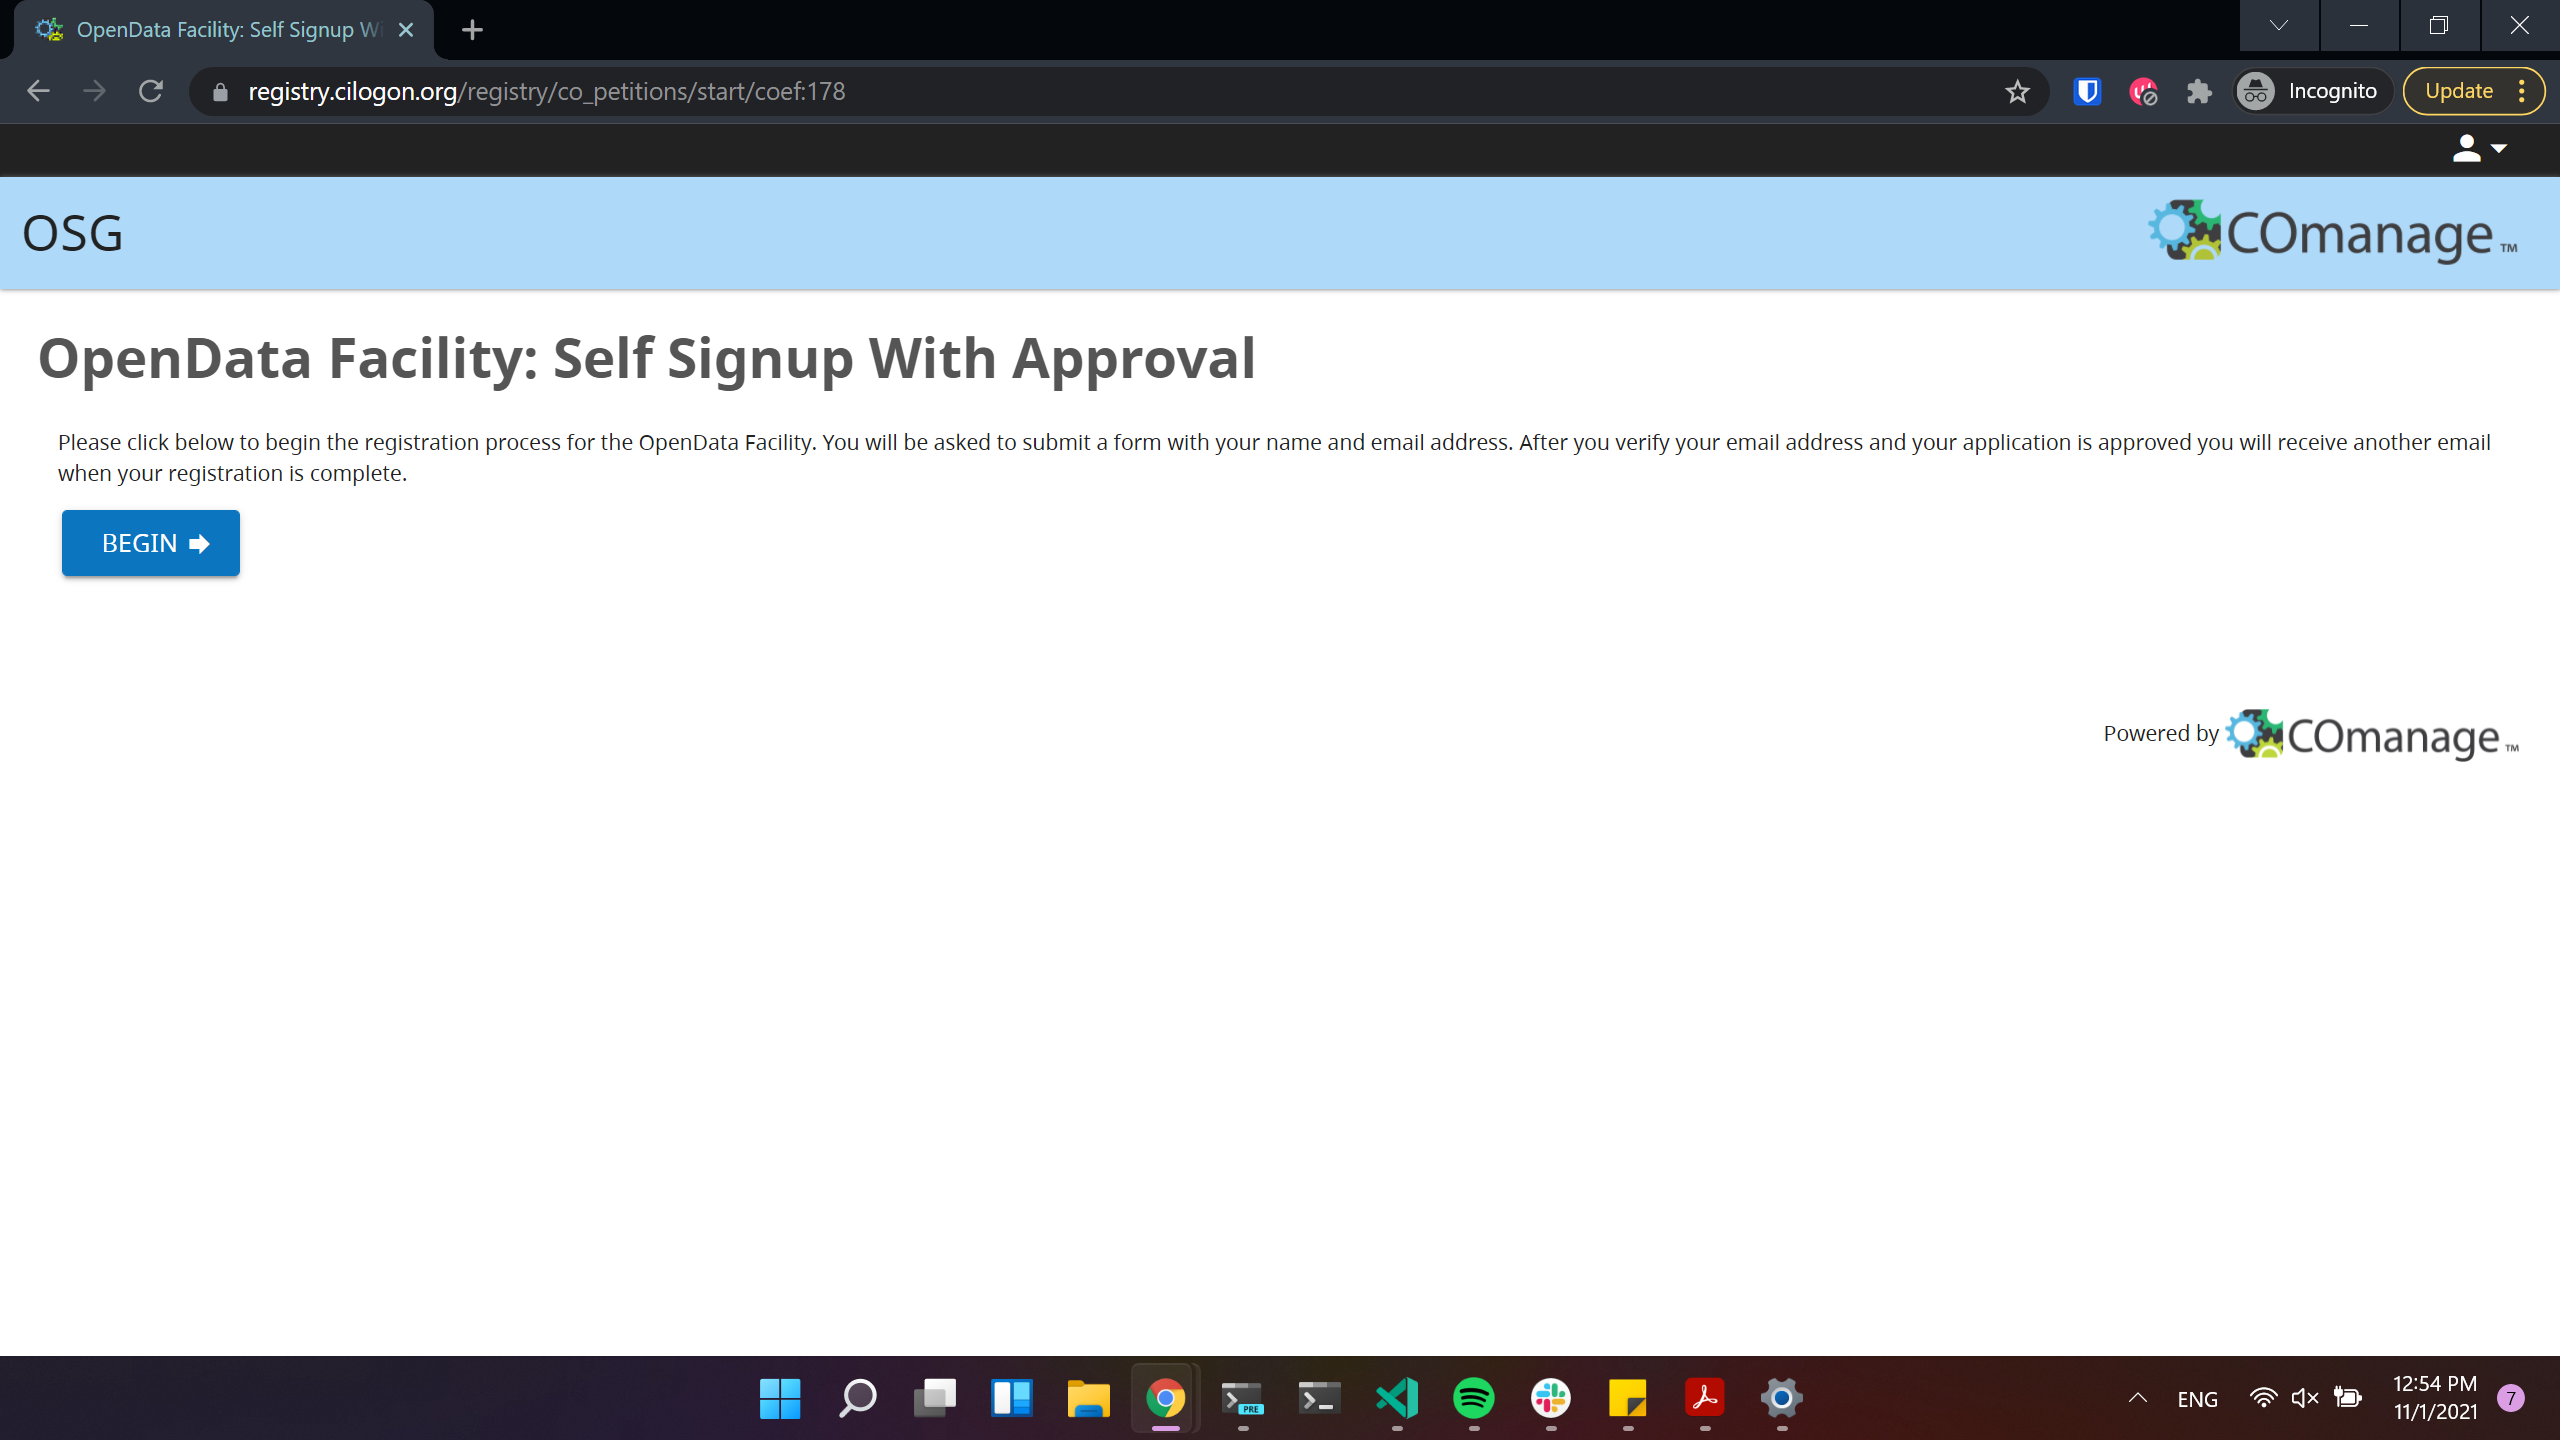 Check a self-signup option with approval.